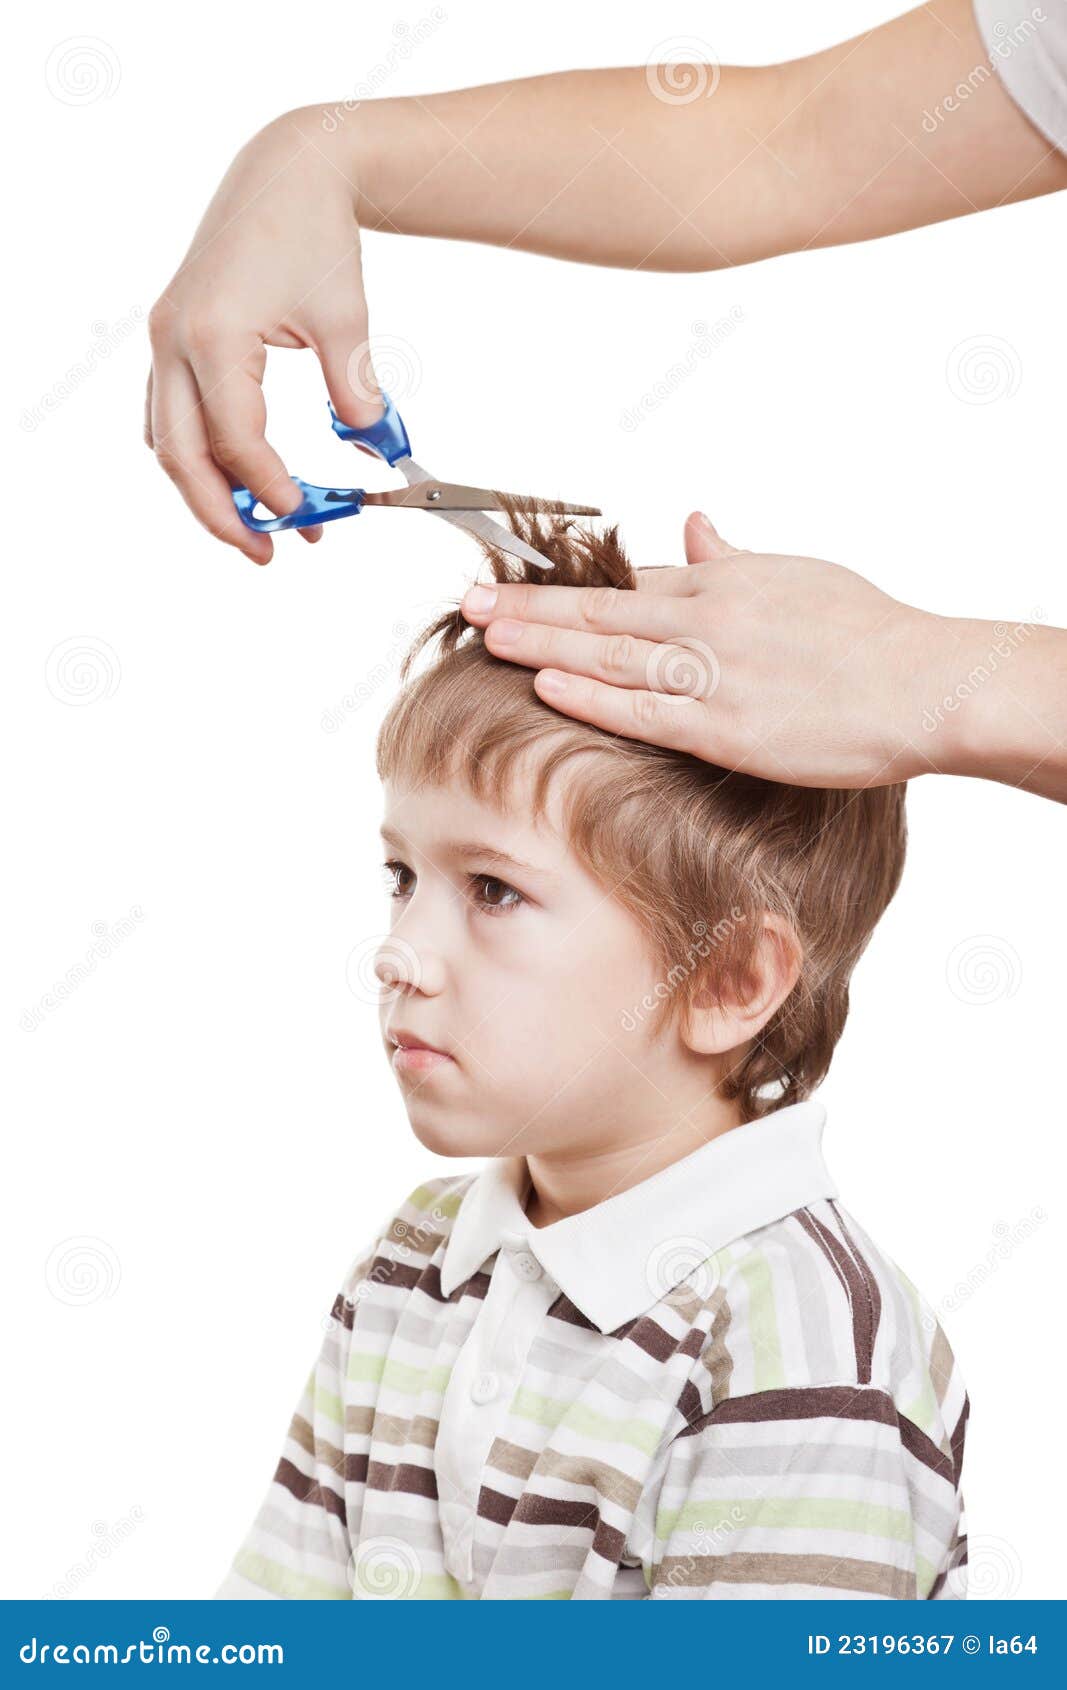  Cutting child hair stock image Image of happiness 